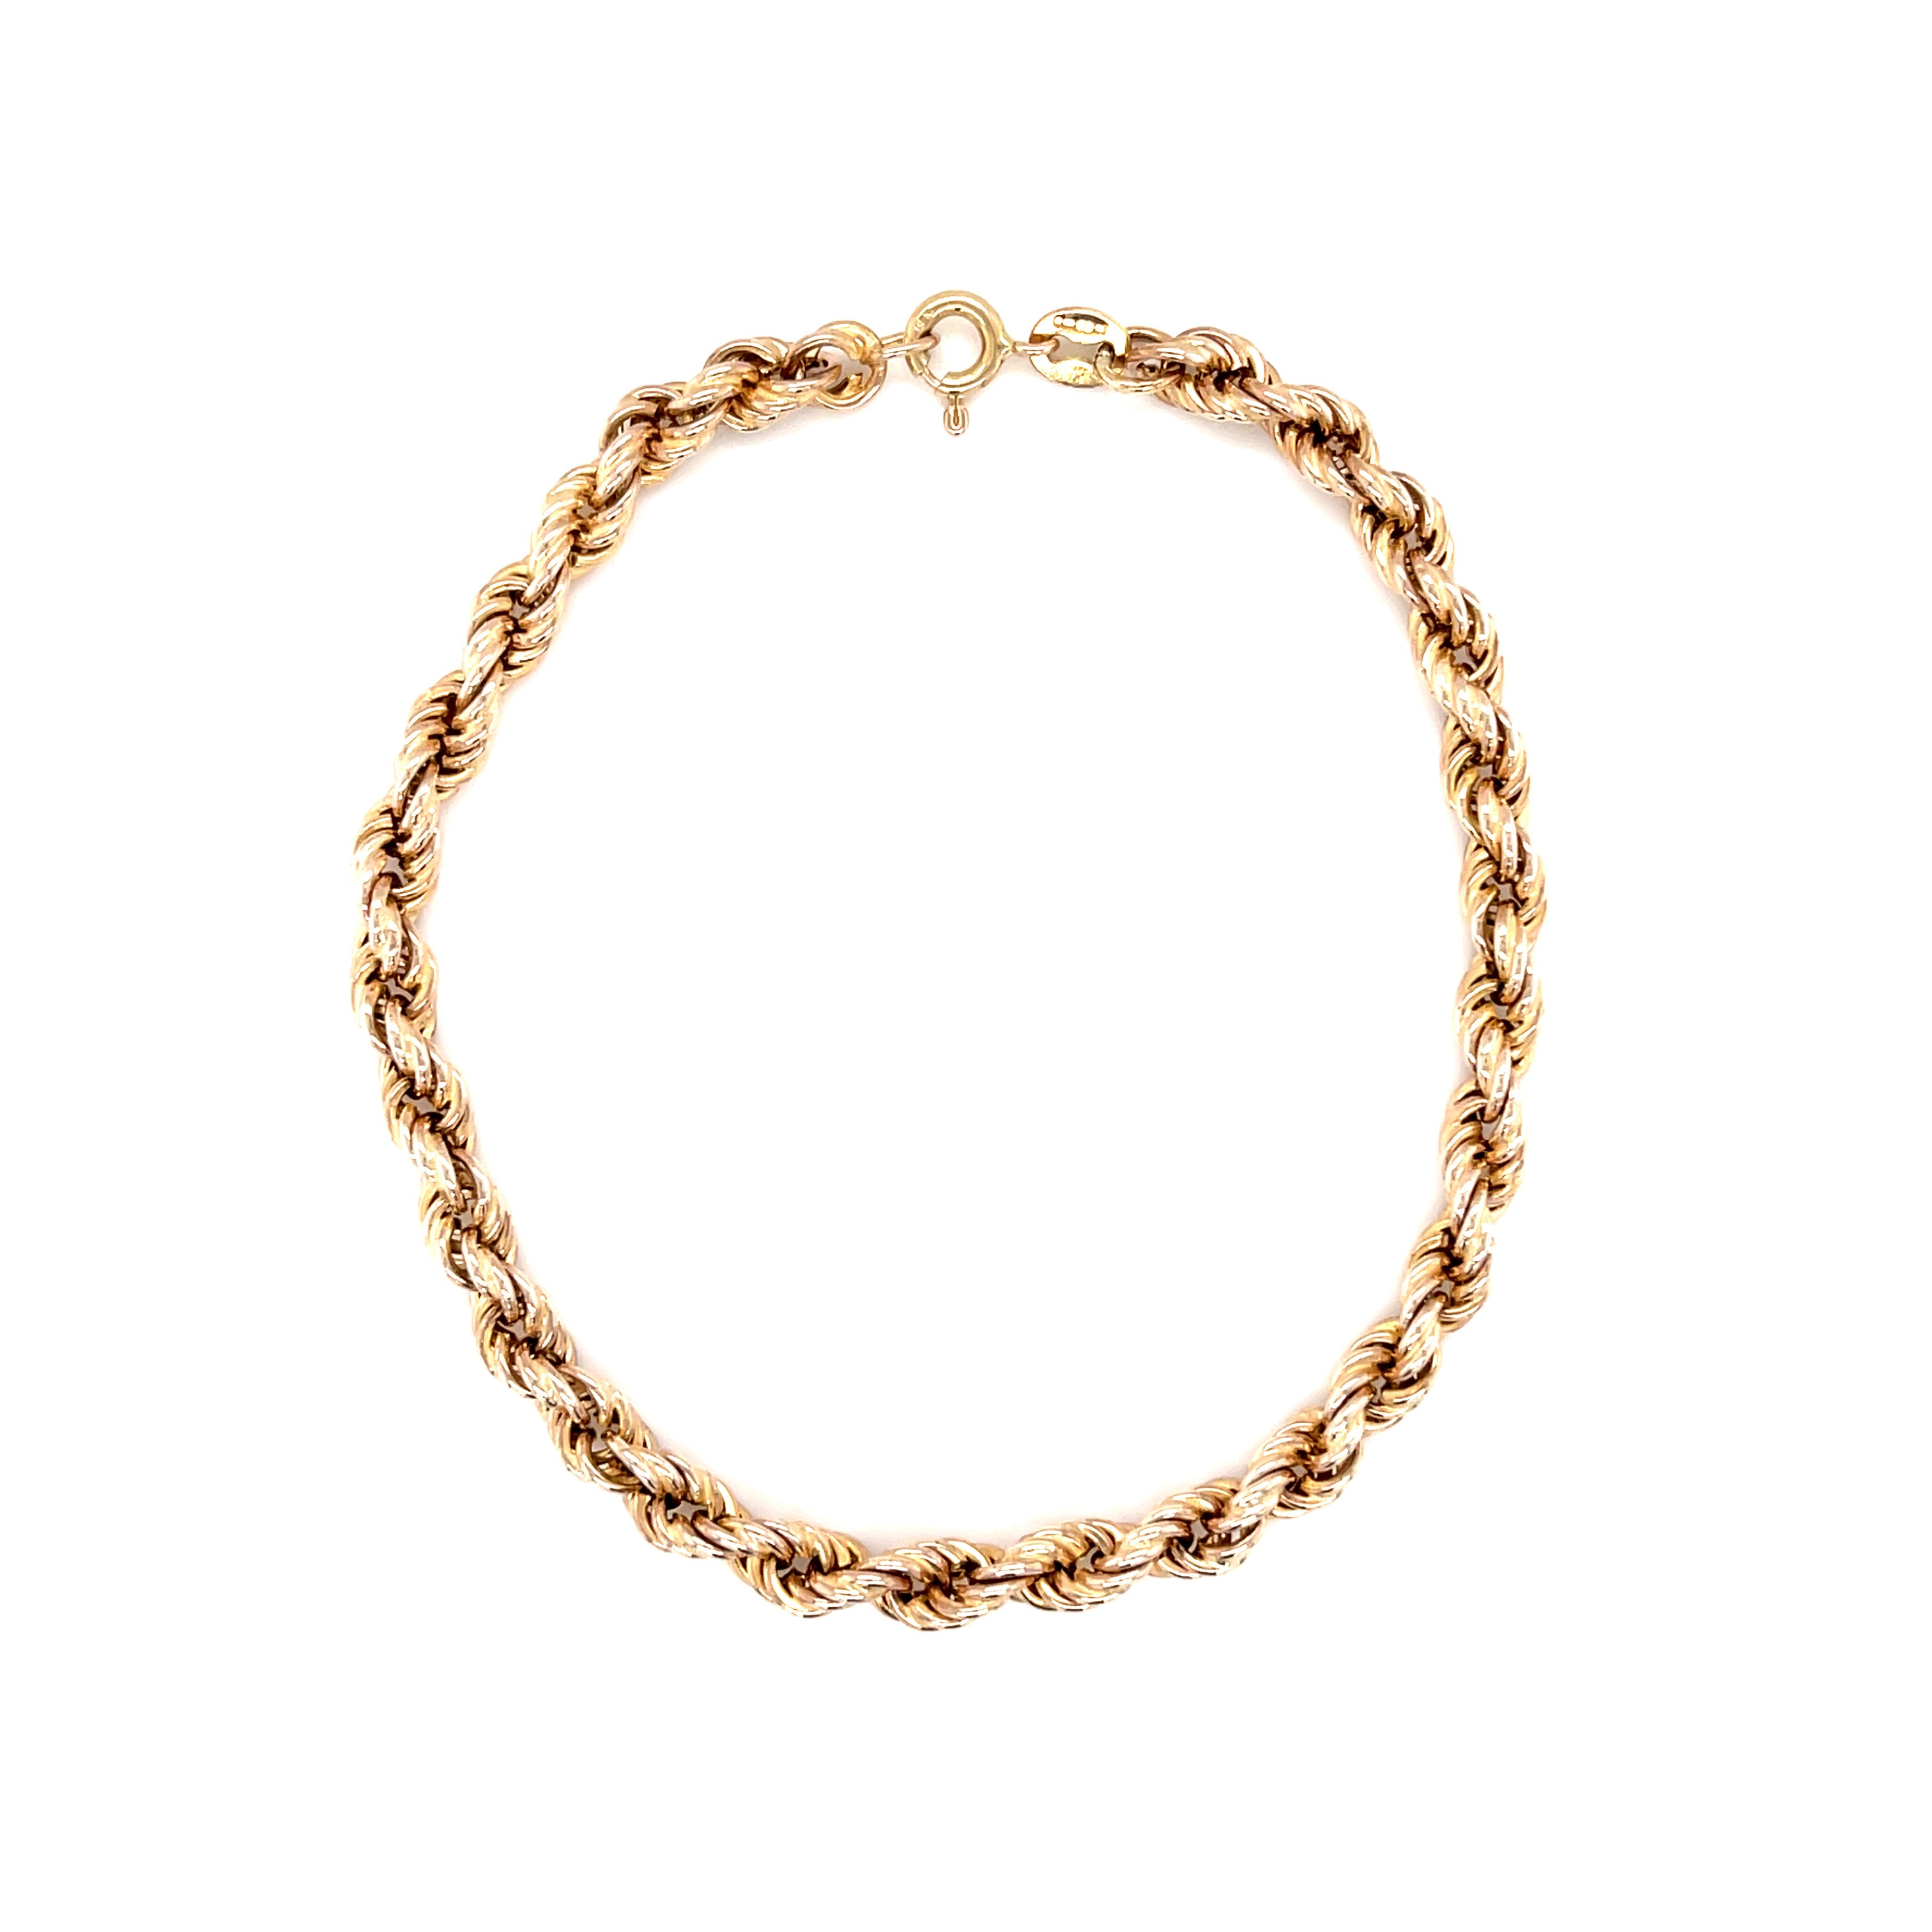 9ct Yellow Gold 7.5" Hollow Rope Bracelet - 5.55g SOLD